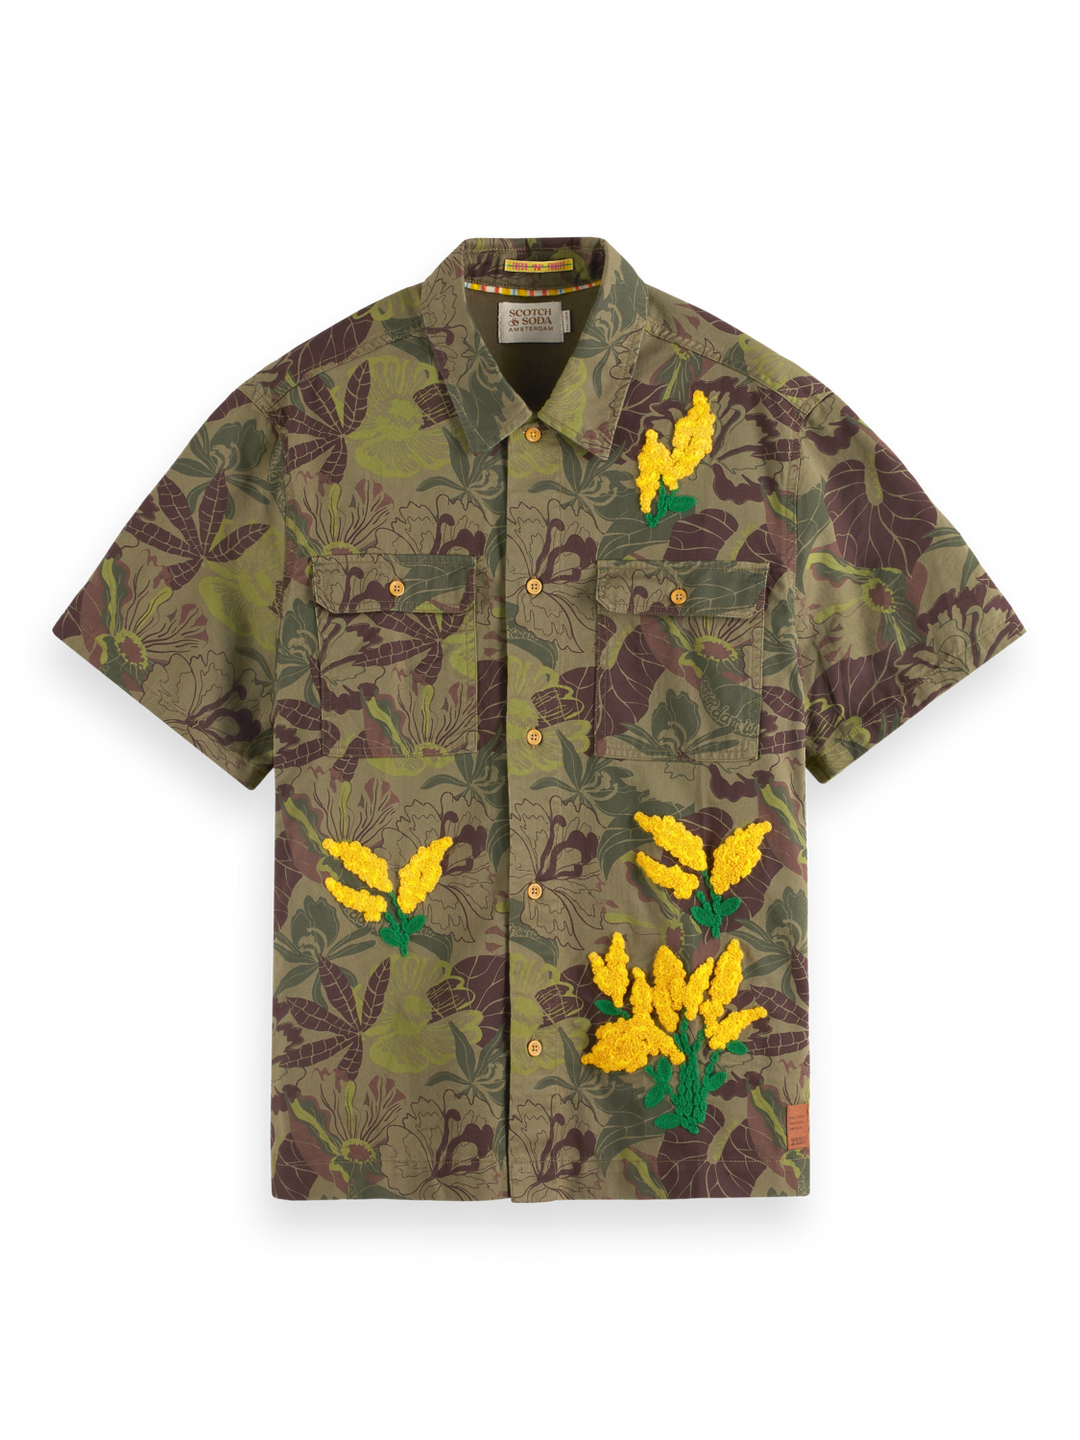 Printed Twill Shirt with Camo Floral Embroidery | Buster McGee